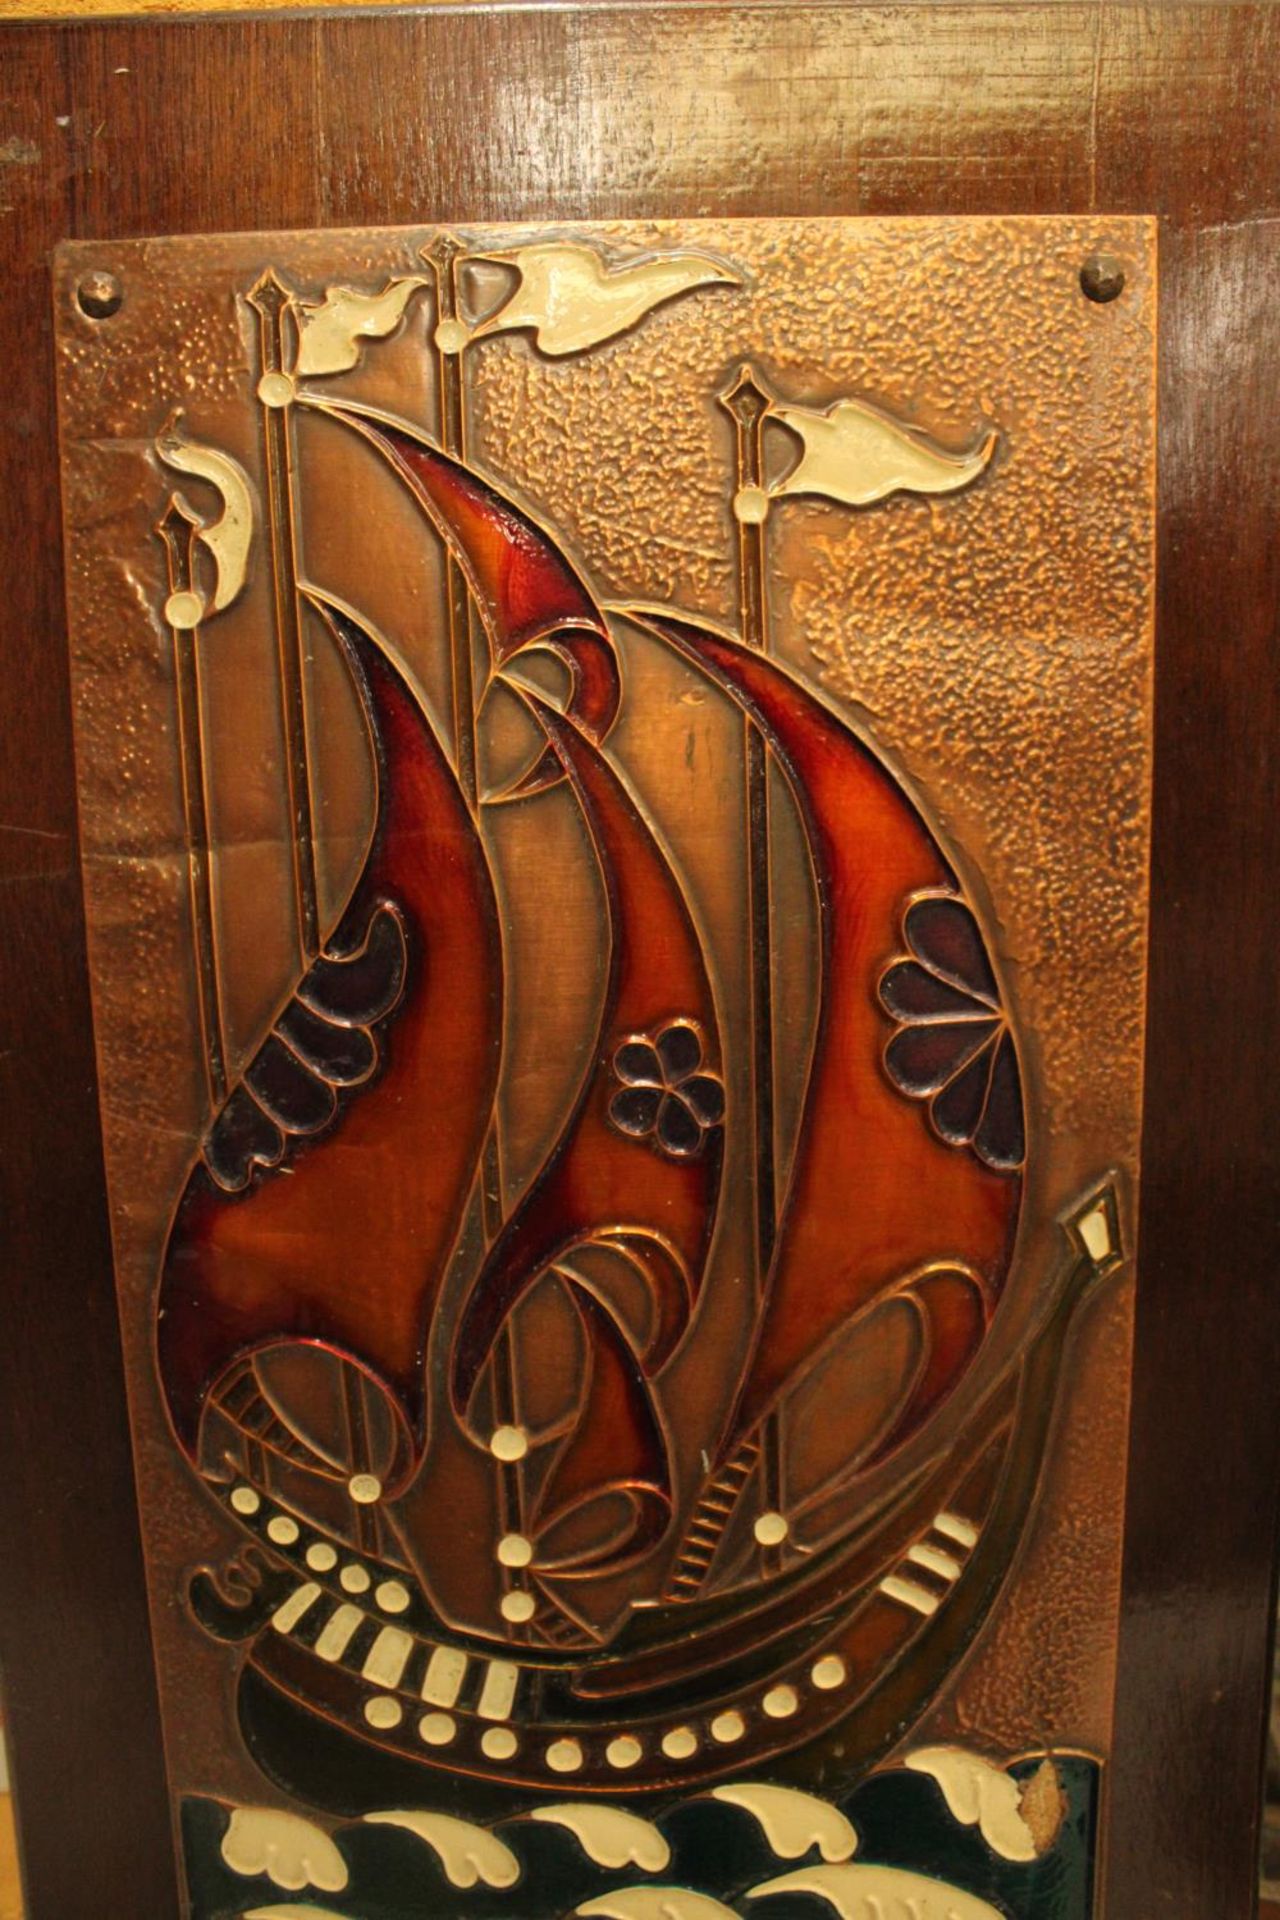 A COPPER AND ENAMELLED ART NOUVEAU GALLEON ON A HARDWOOD BACKBOARD 28" X 15" - Image 2 of 3